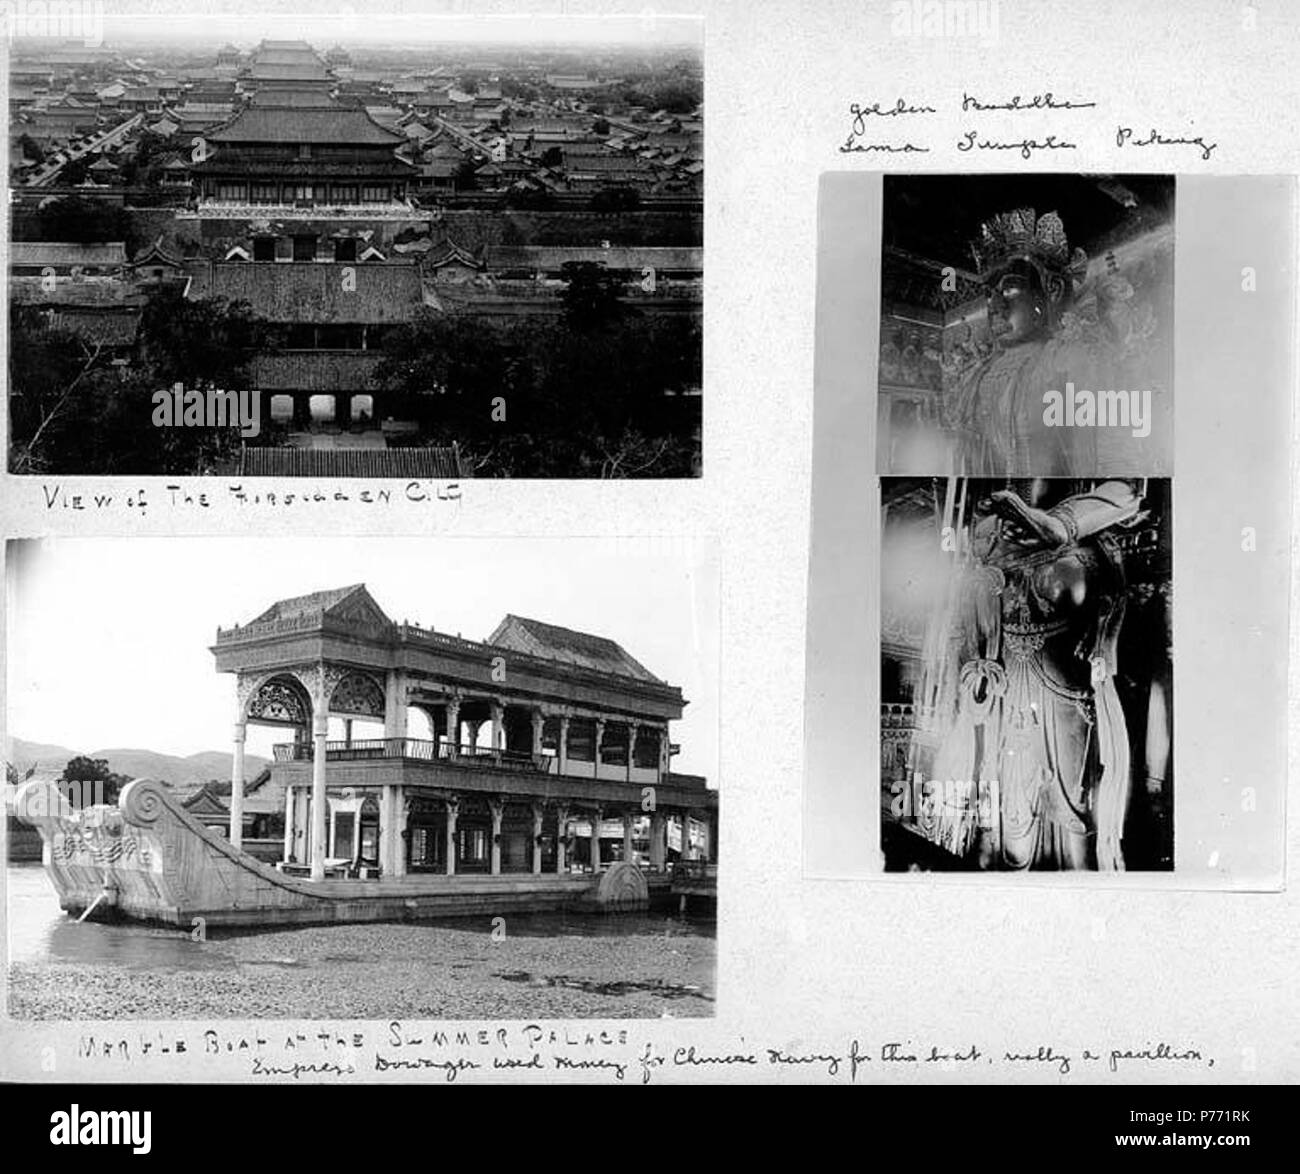 . English: 7.29 Peking scenes, ca. 1903 . English: Captions on album page: View of the Forbidden City; Golden Buddha, Lama Temple, Peking; Marble boat at the Summer Palace, Empress Dowager used money for Chinese navy for this boat, really a pavillion . PH Coll 241.B29a-c Subjects (LCTGM): Castles & palaces--China--Beijing; Buddhas--China--Beijing; Buddhist temples--China--Beijing; Pavilions--China--Beijing Subjects (LCSH): Forbidden City (Beijing, China); Gautama Buddha--Art; Sculpture, Buddhist--China--Beijing; Buddhist art and symbolism--China--Beijing; Yong he gong (Beijing, China); Yihe Yu Stock Photo